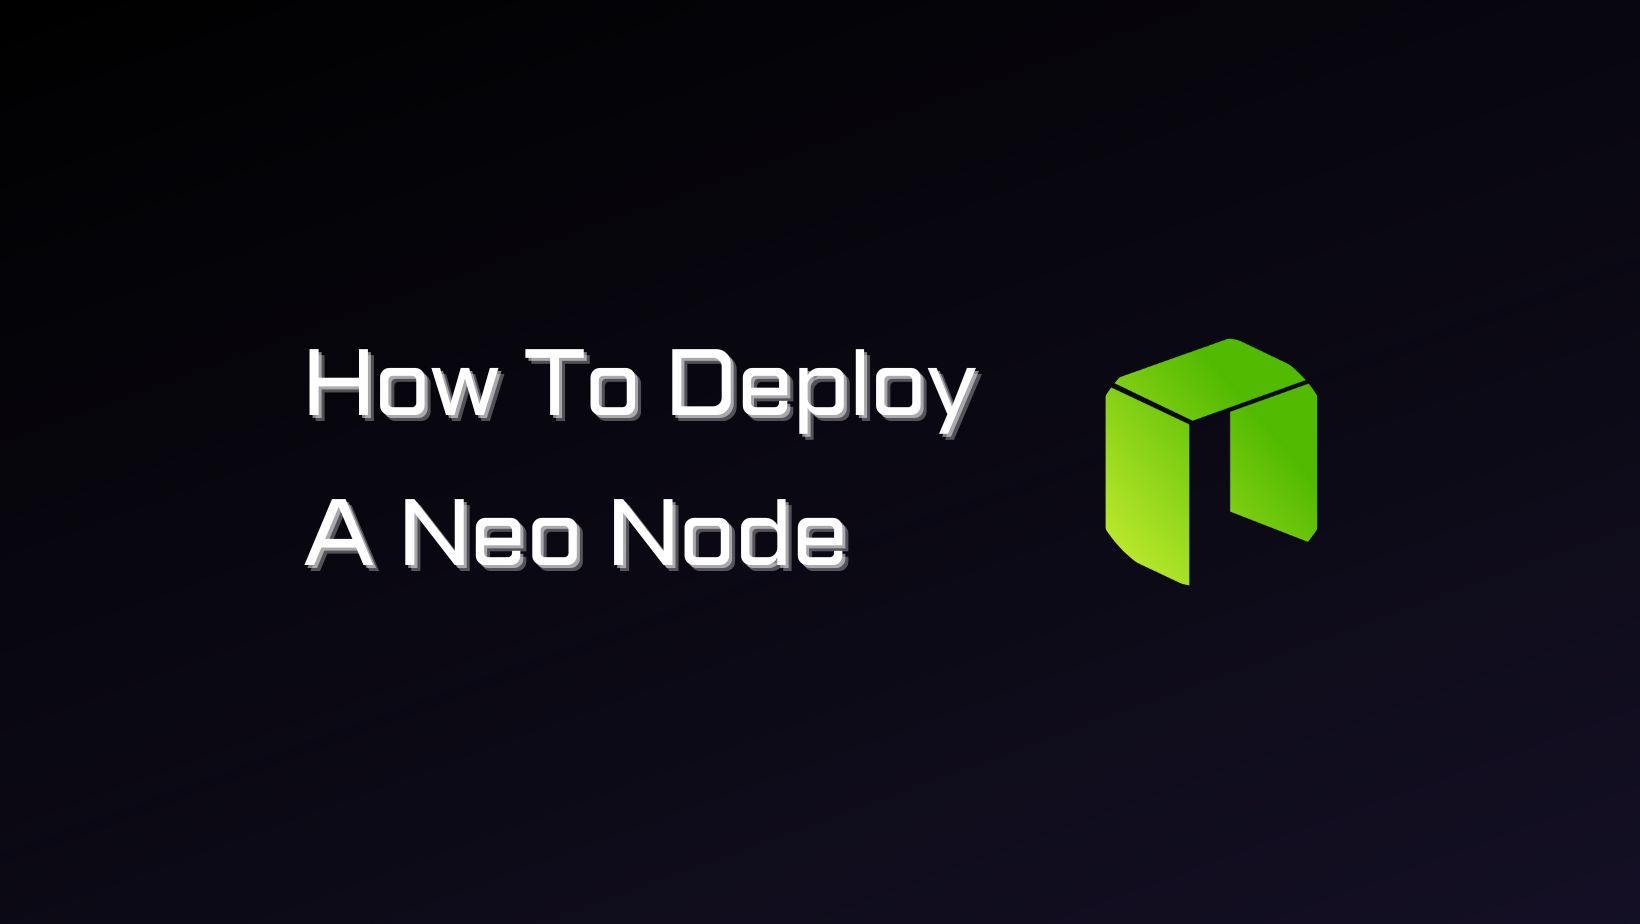 How To Deploy A Neo Node on Linux